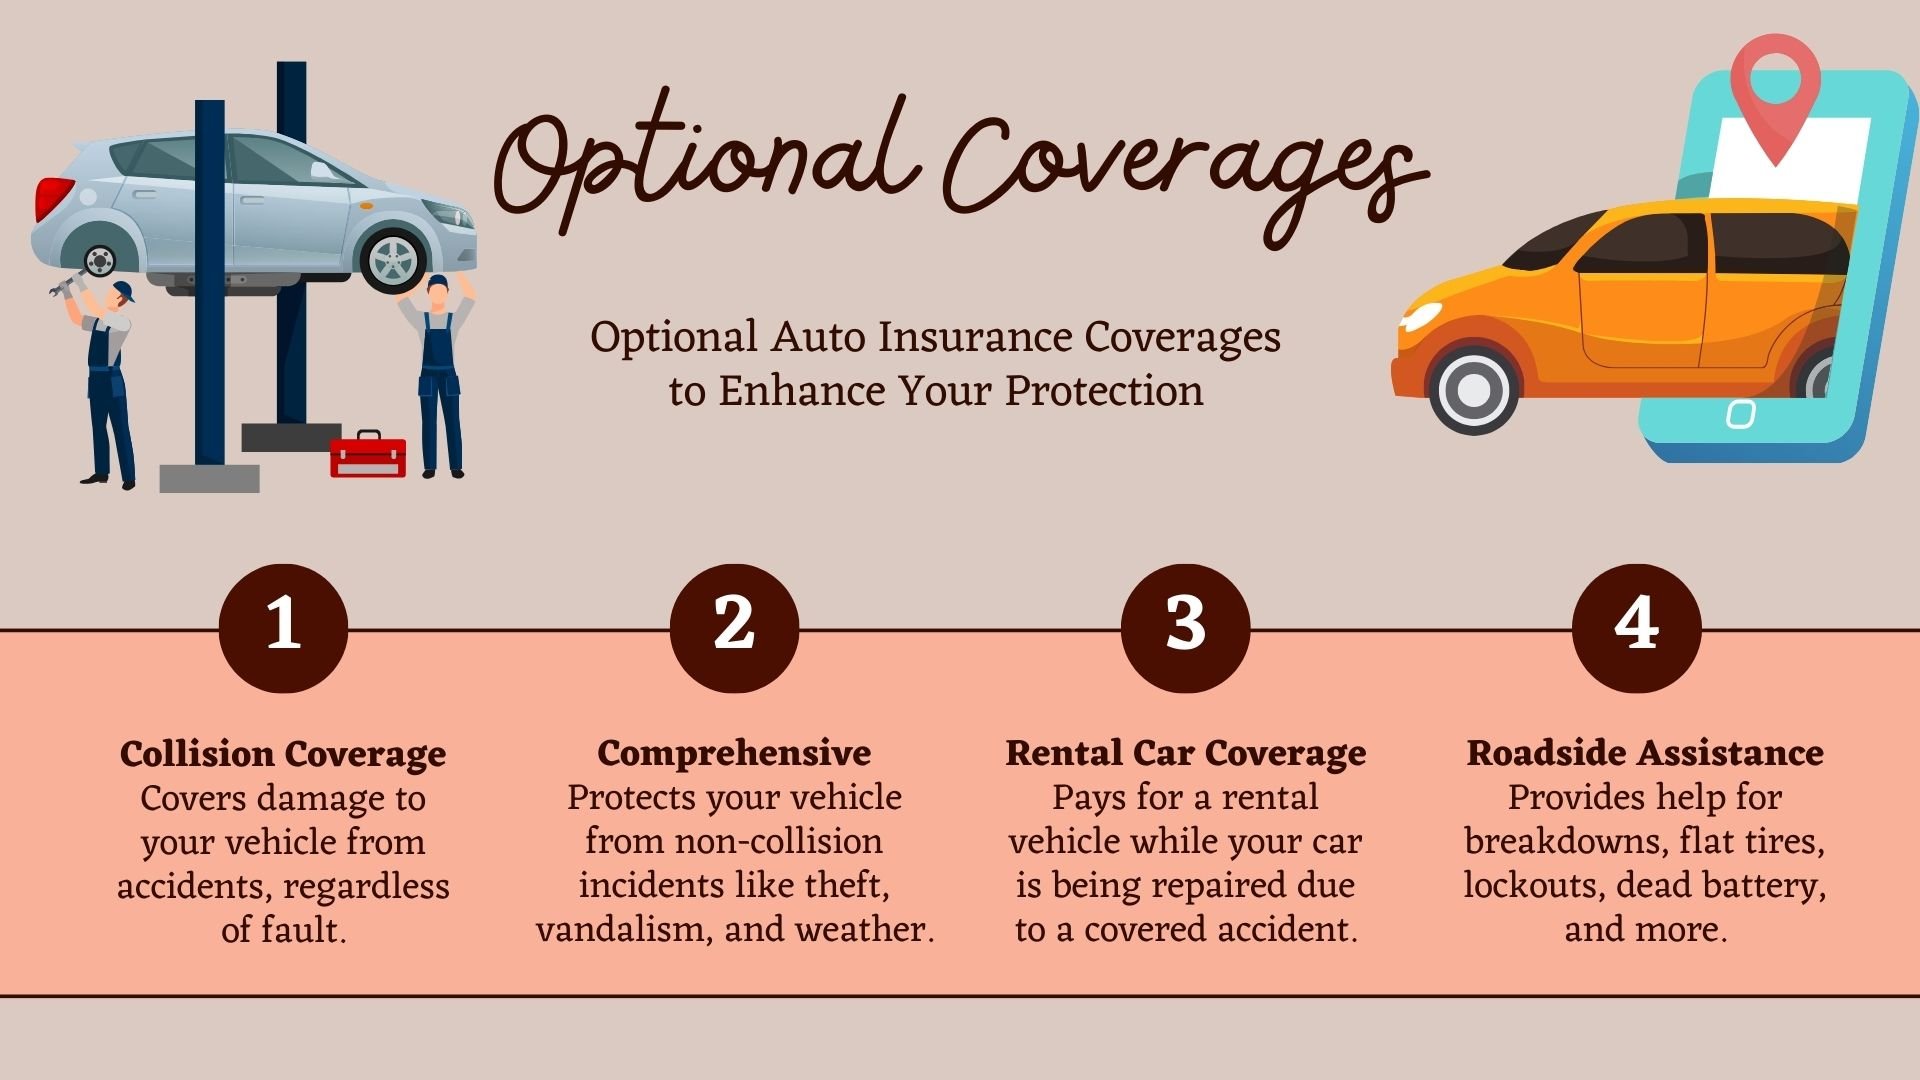 Optional Auto Insurance Coverages